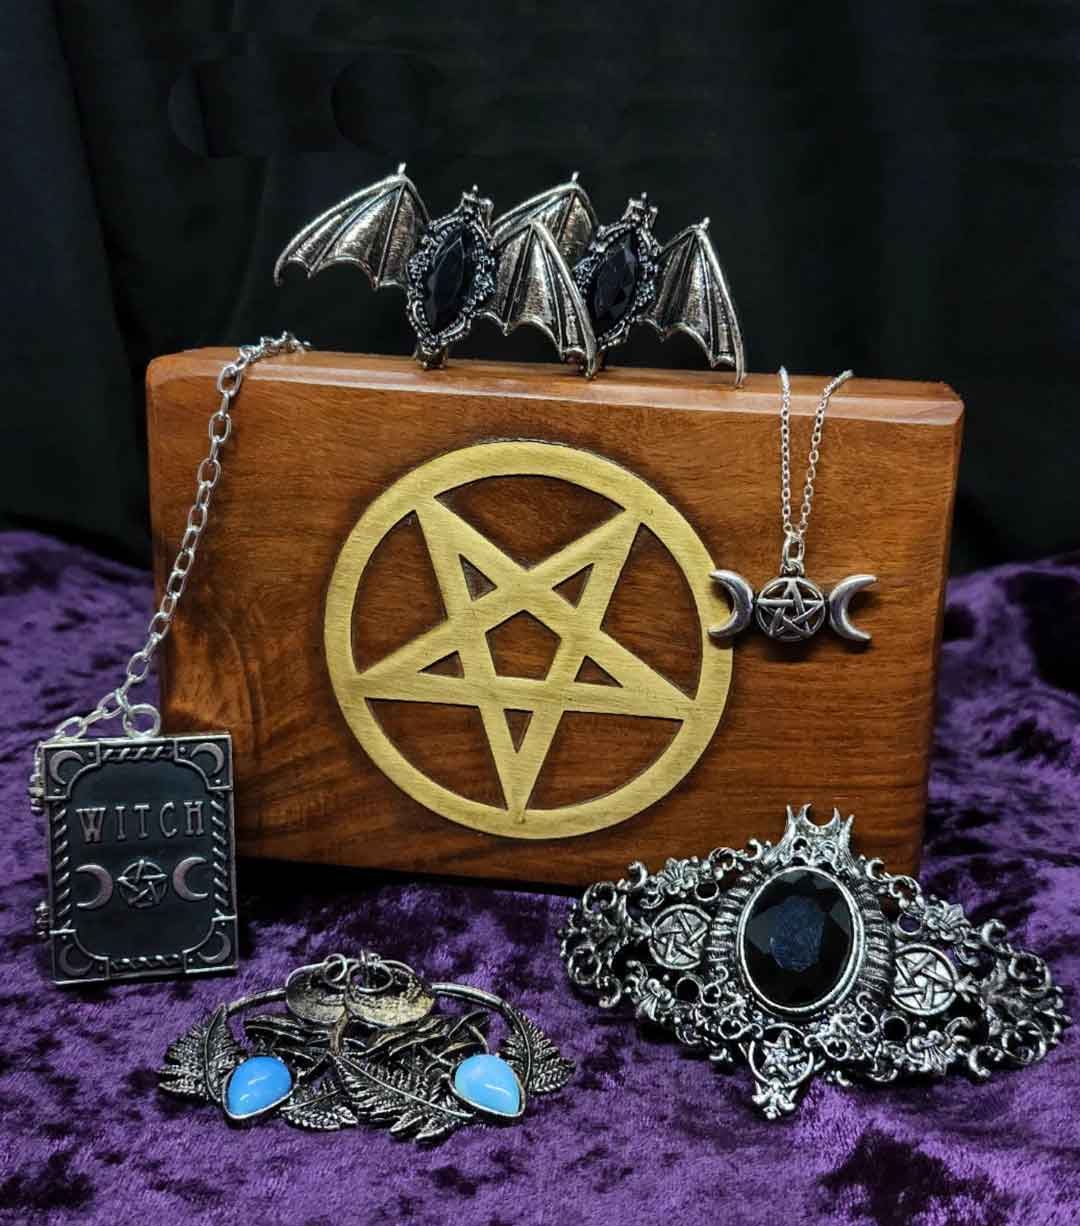 wooden box with gold pentagram - perfect for tarot cards - plus bat hair clips in silver and black and a black and silver hair barette